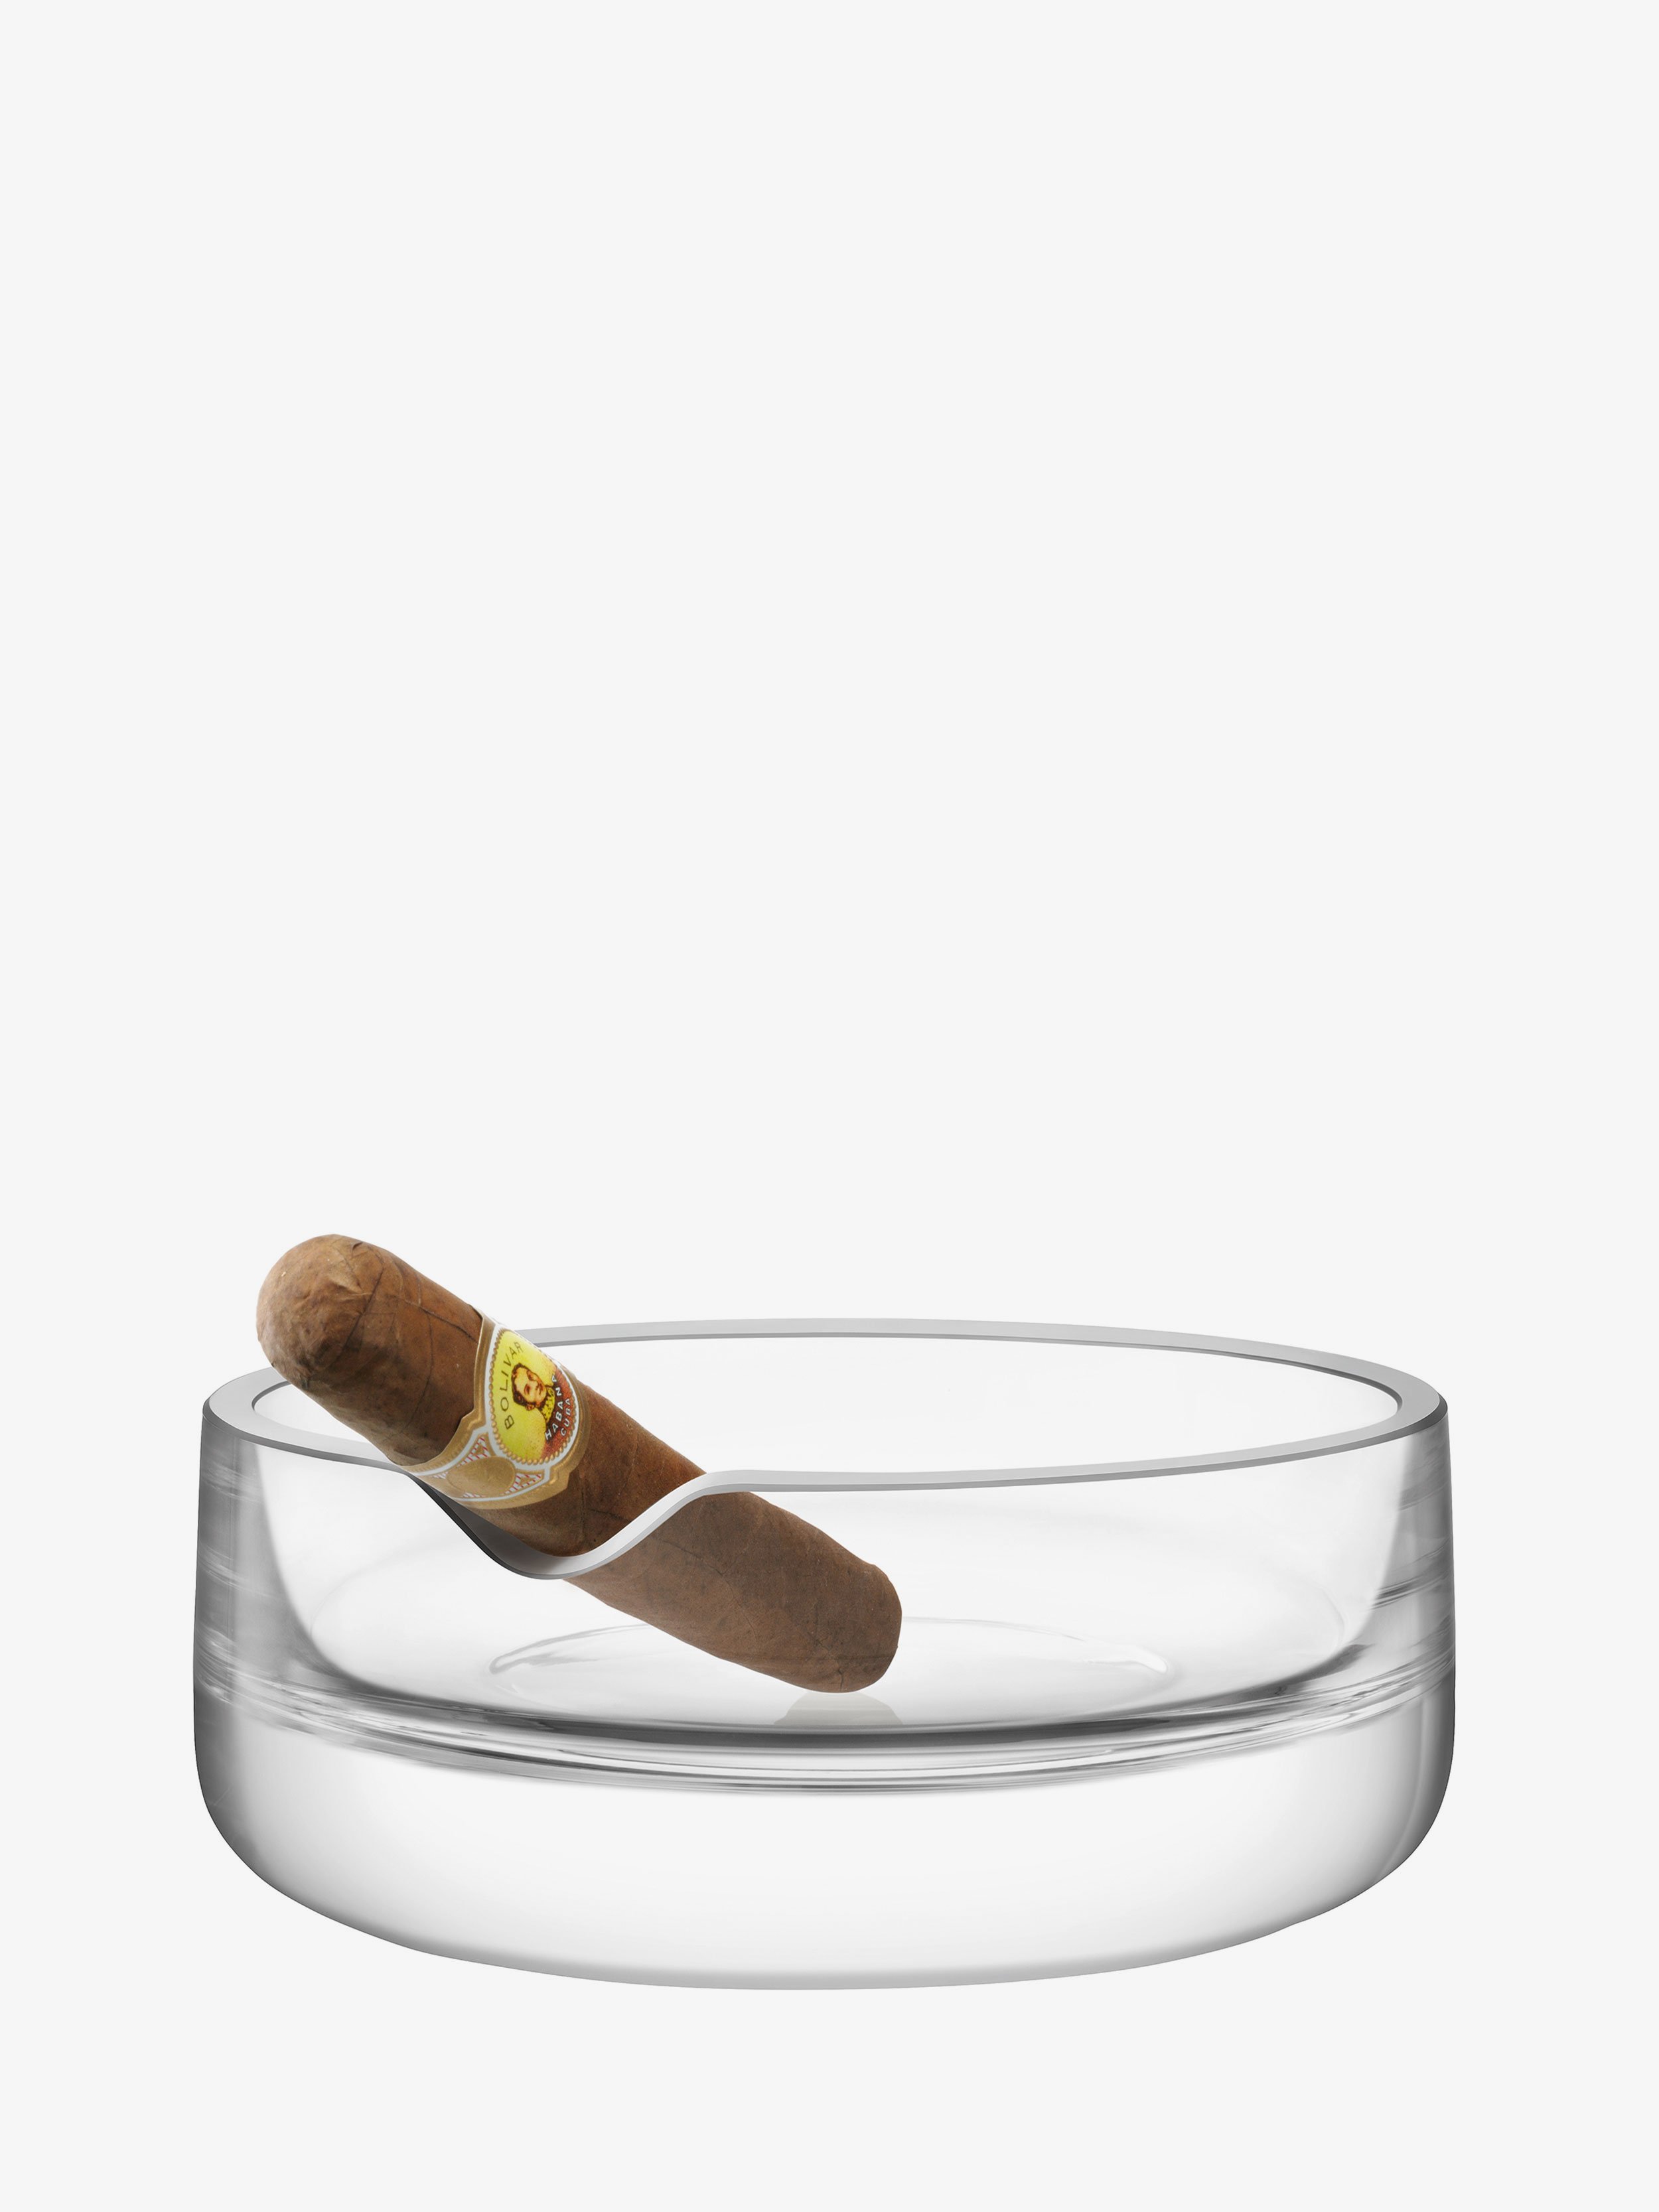 Cigar Ashtray H2.75in, Clear | Bar Culture | LSA Gifts